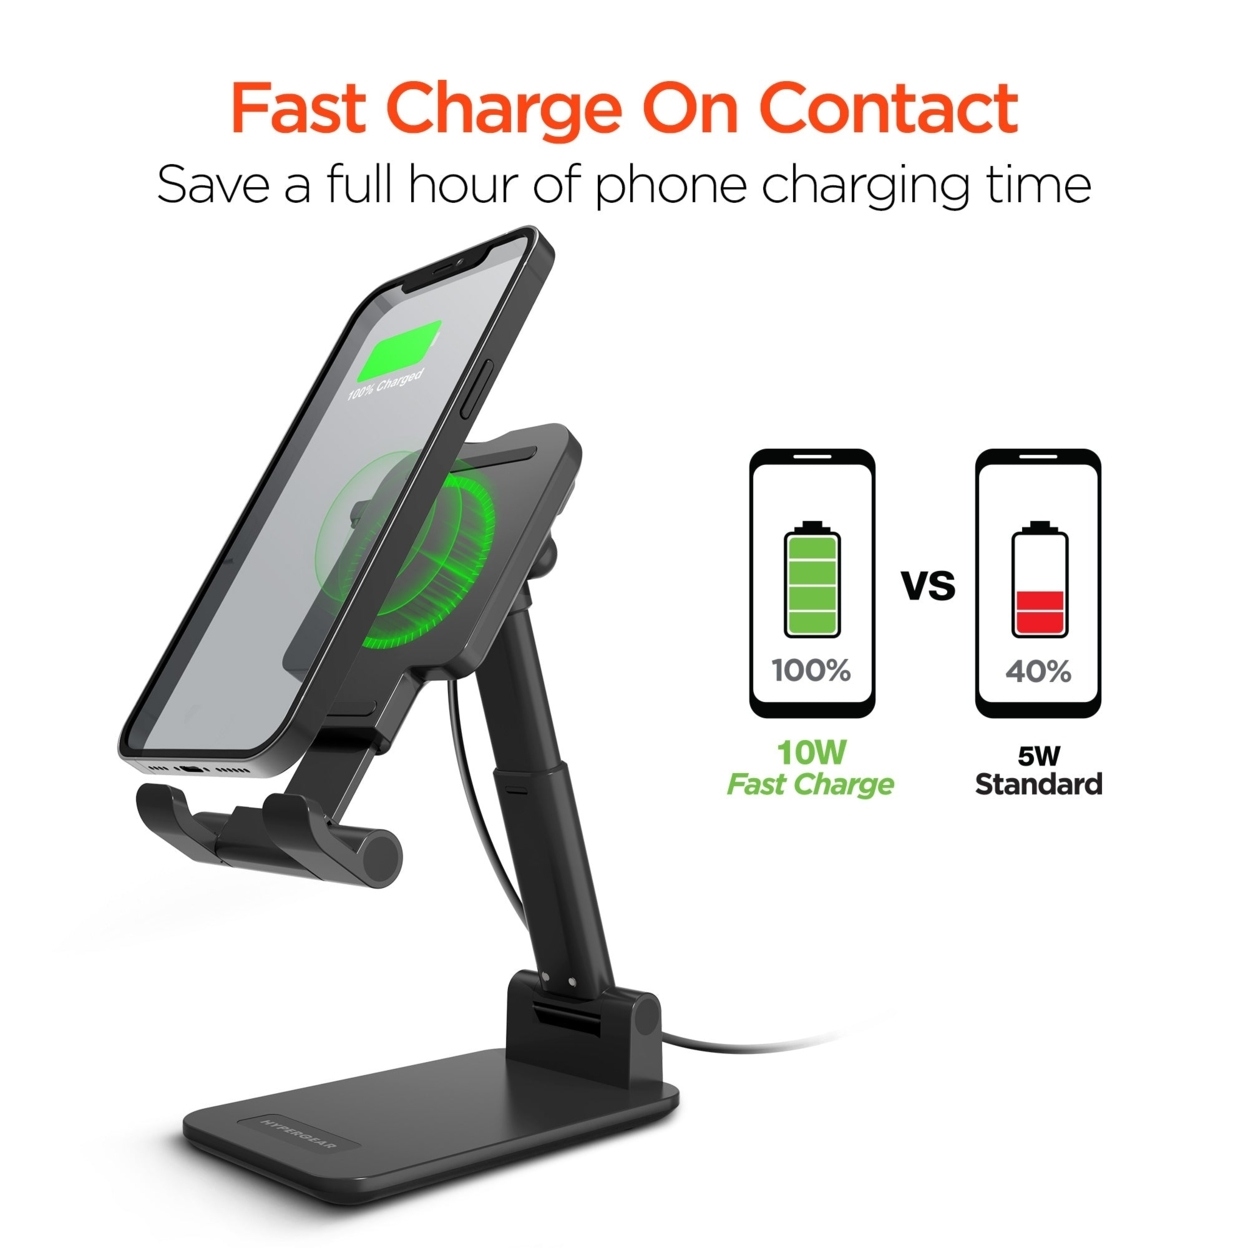 Hypergear PowerFold Wireless Fast Charge Desktop Stand With Charger (15415-HYP)